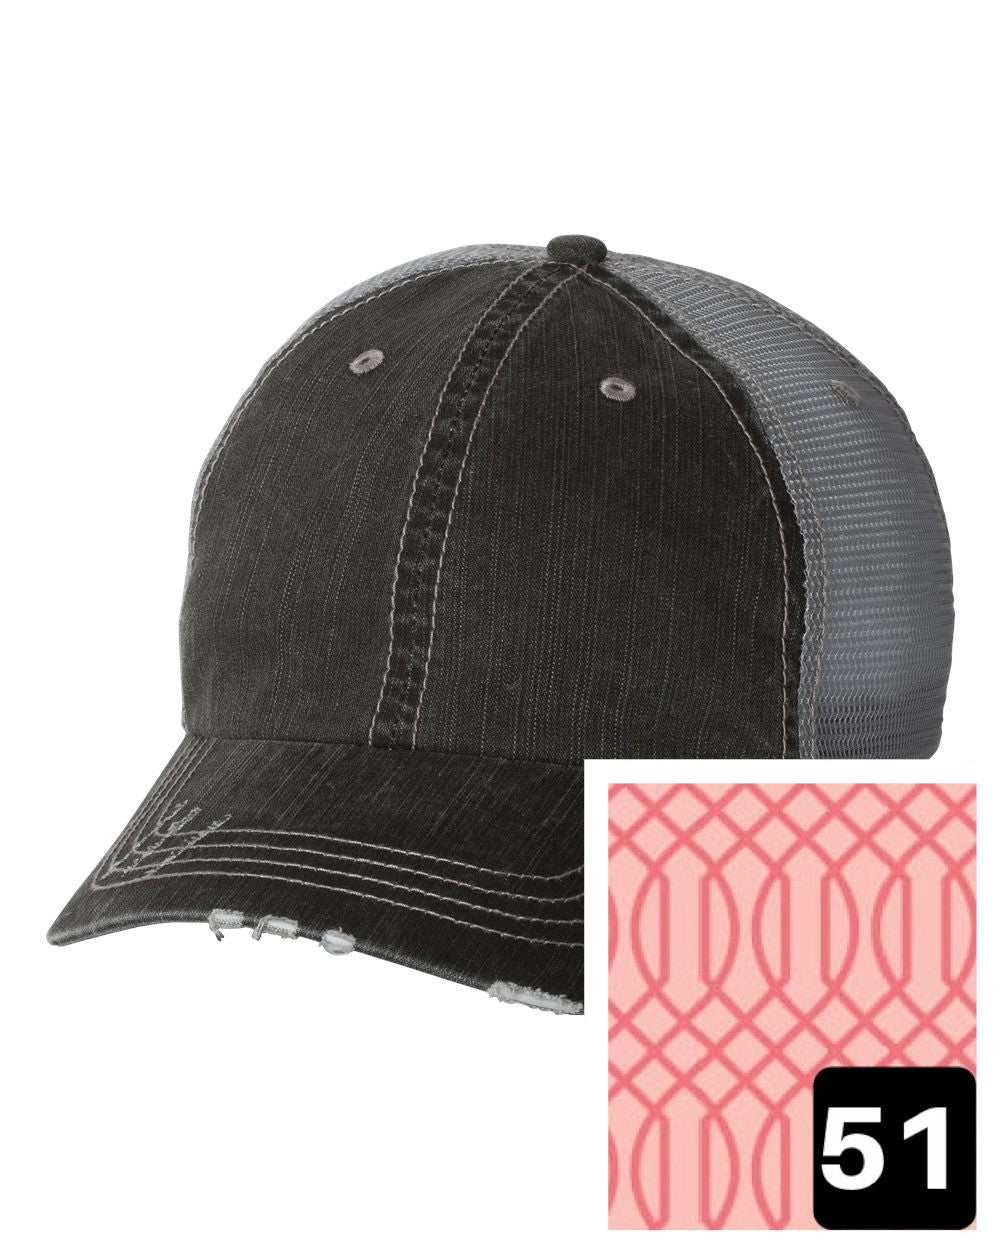 gray distressed trucker hat with gray geometric fabric state of Maine